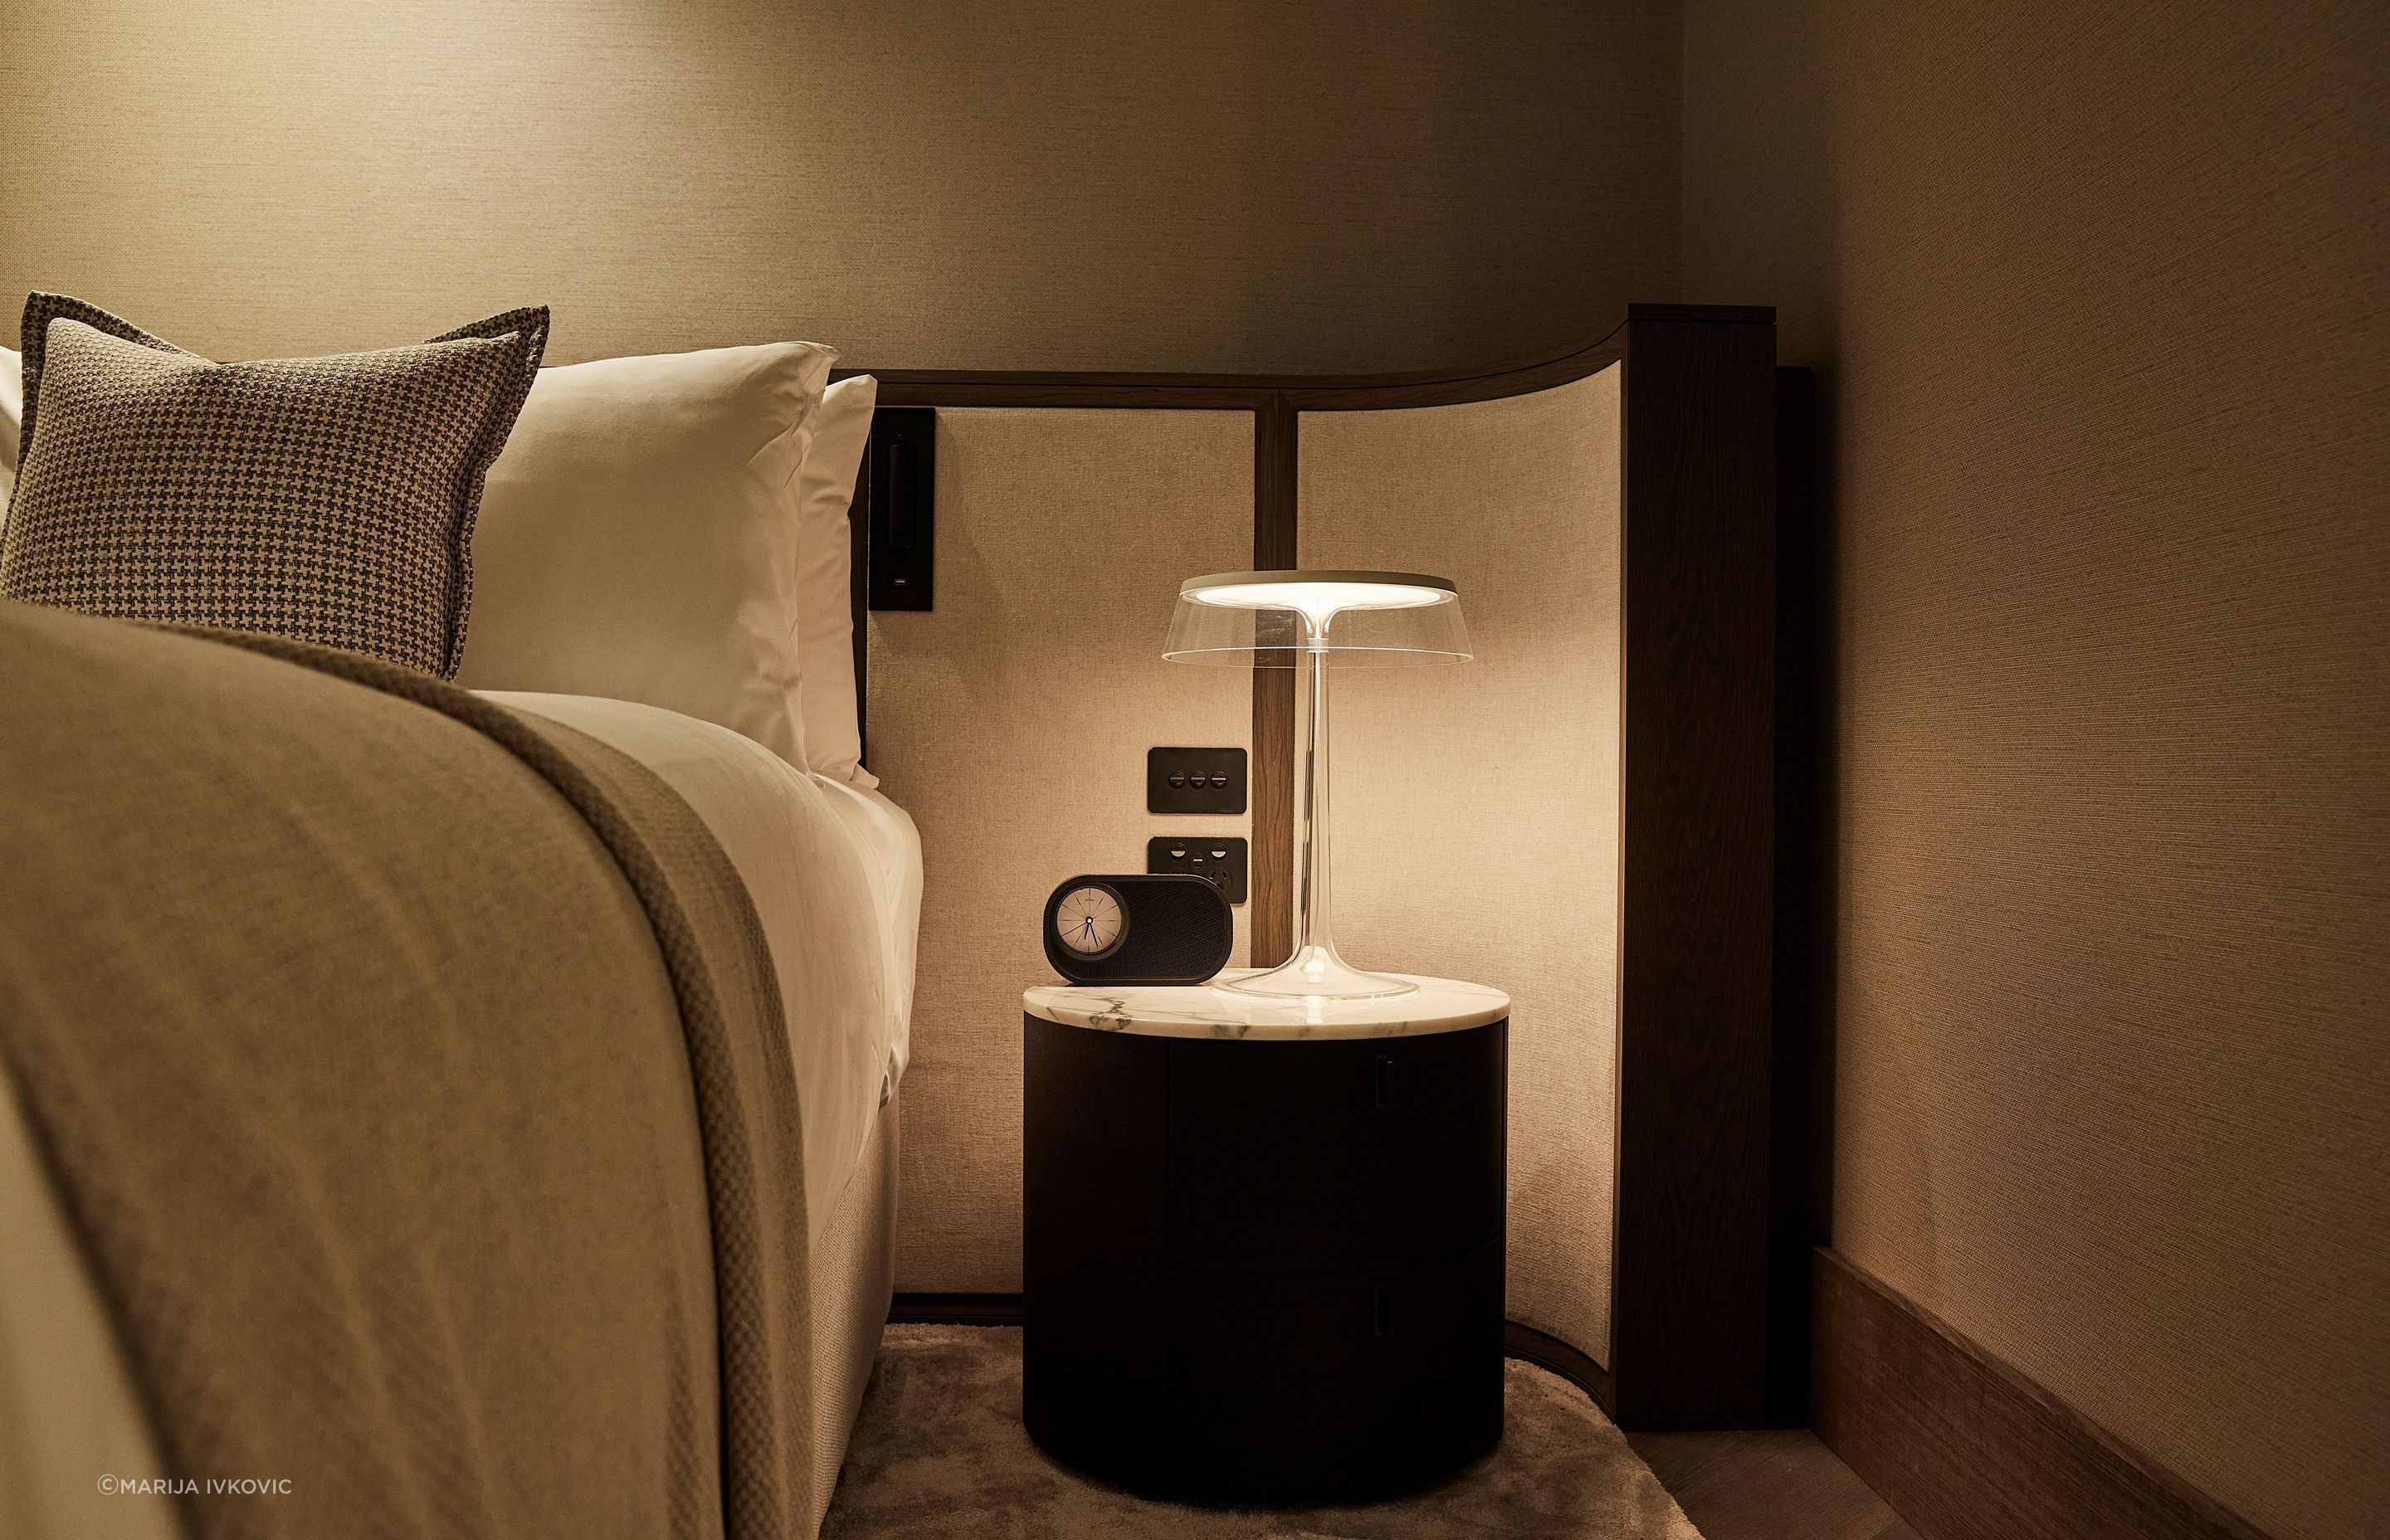 Lighting was carefully considered by DKO, in order to get the perfect soft lighting that exudes calm and serenity. Lamps are used throughout the hotel for an intimate and cosy effect.